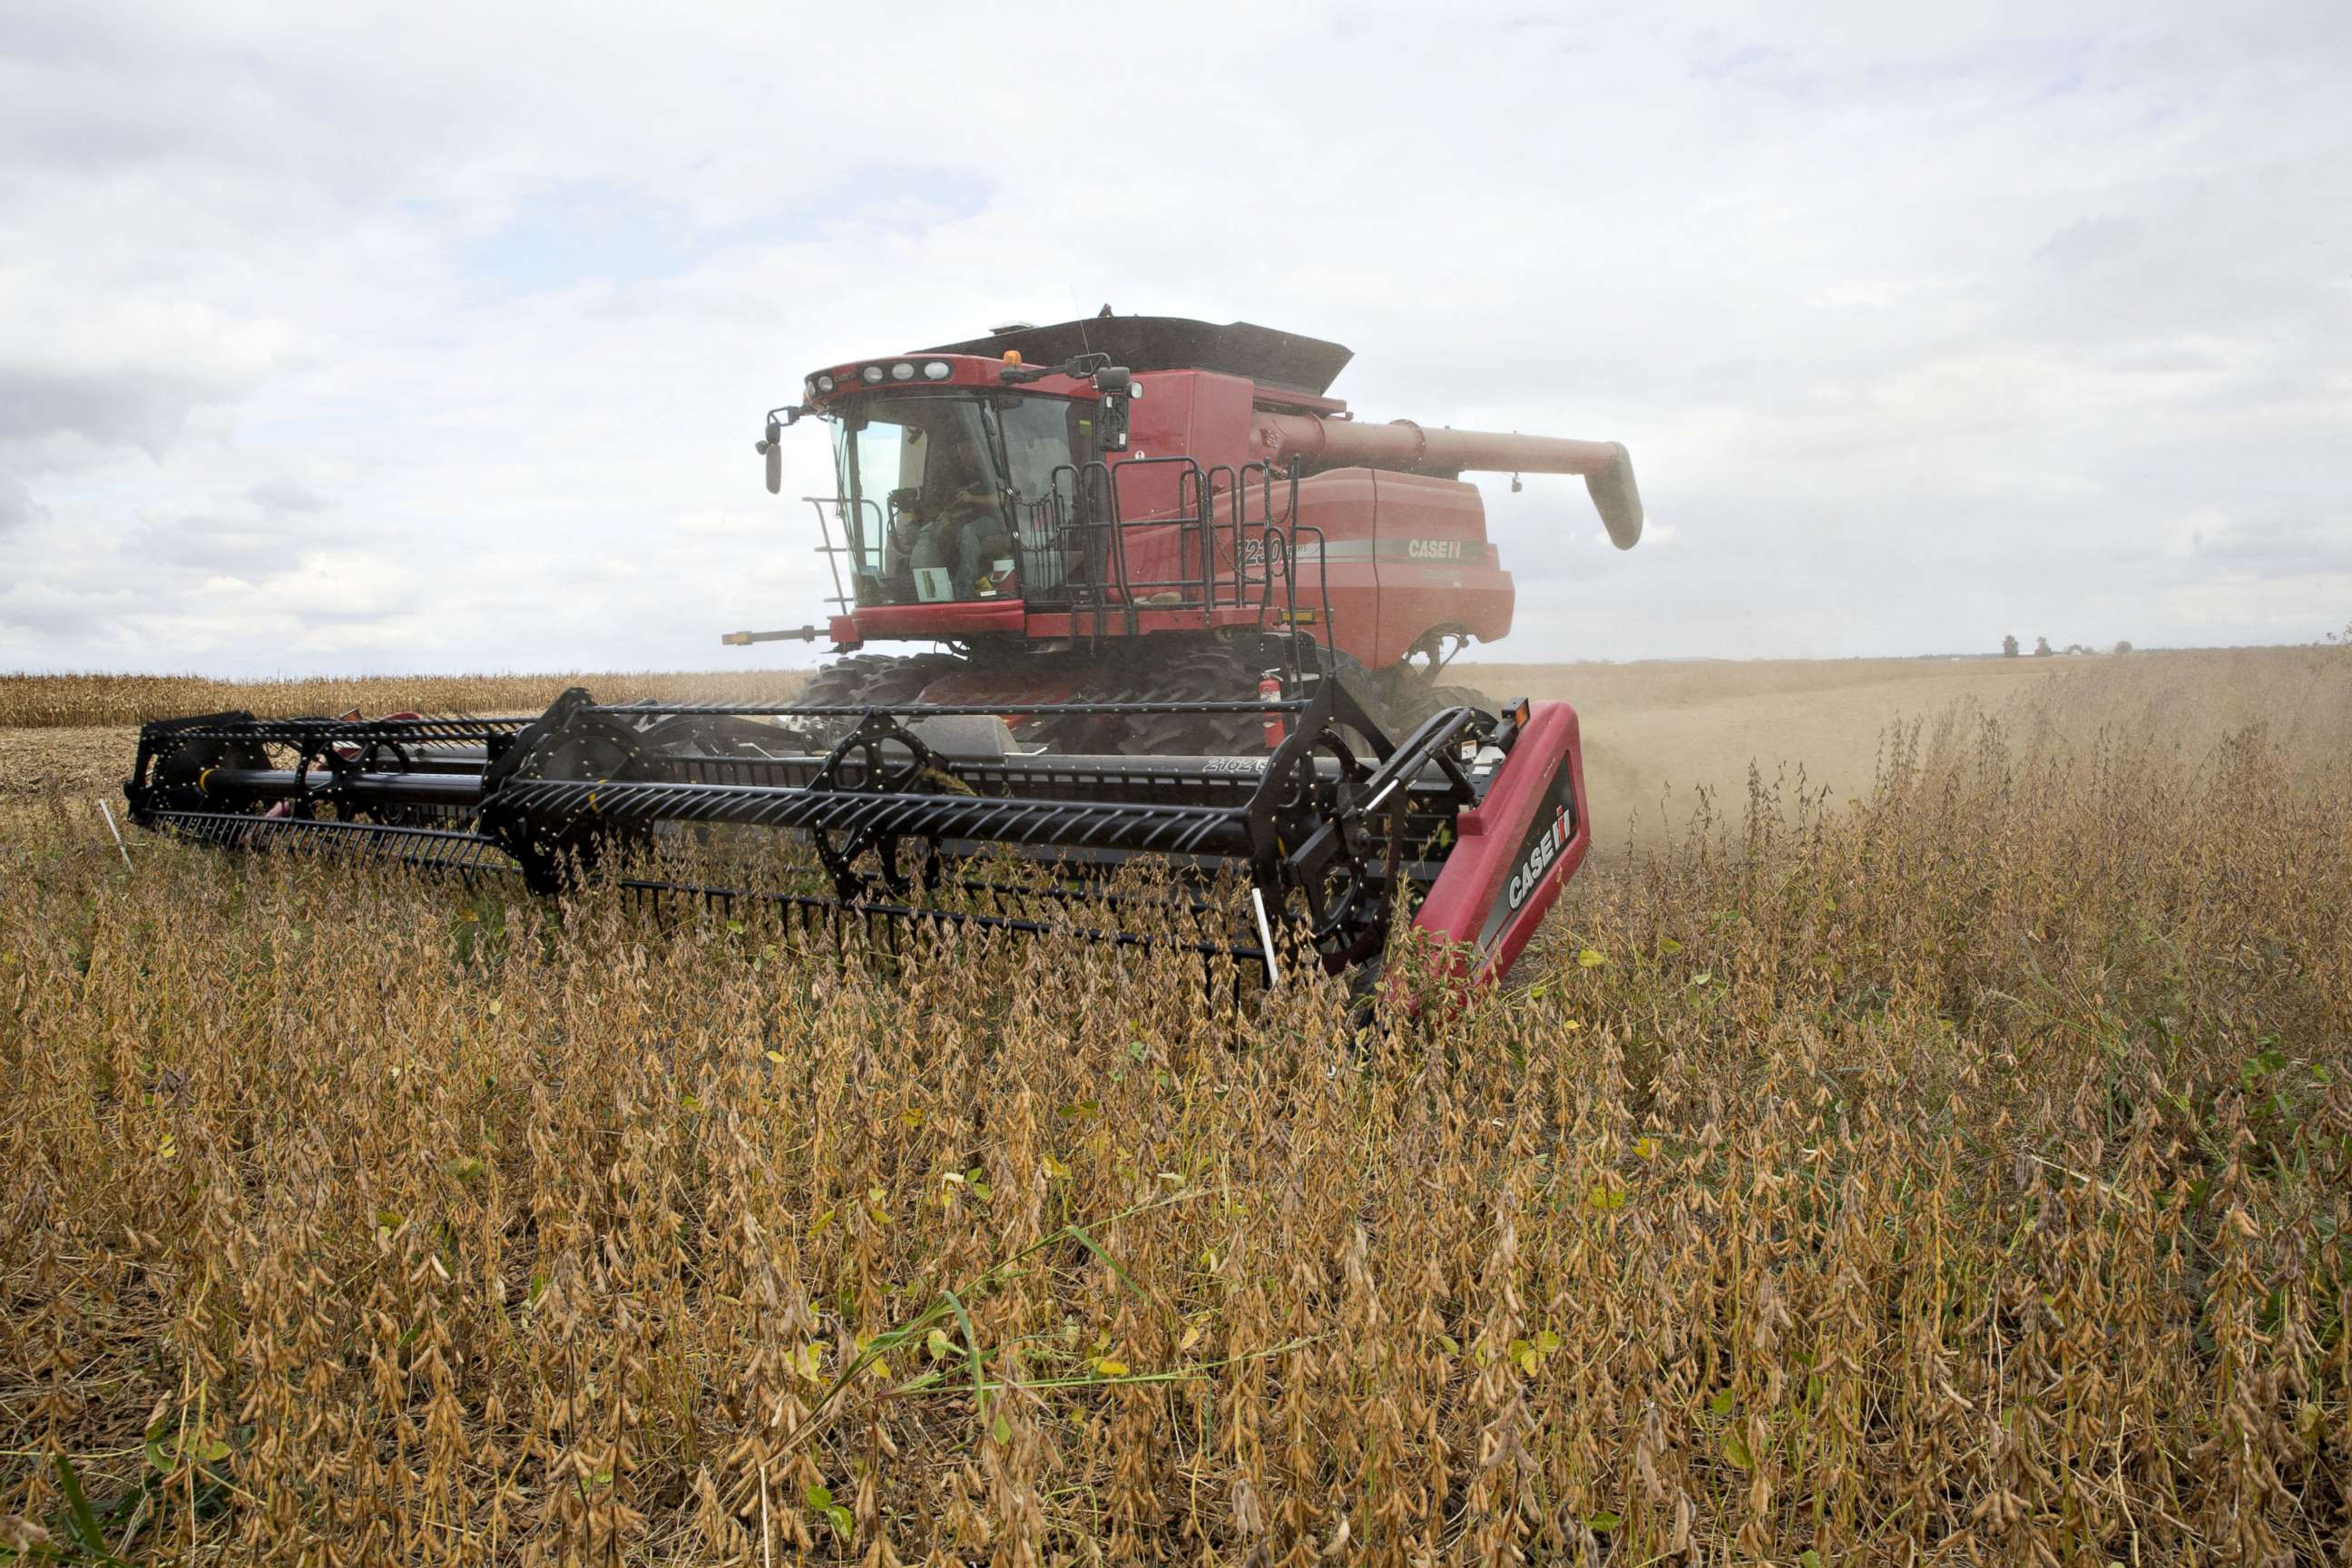 PHOTO: Syngenta Group Co. NK Soybeans are harvested with a Case IH combine harvester near Princeton, Ill., Sept. 29, 2016, this this file photo.